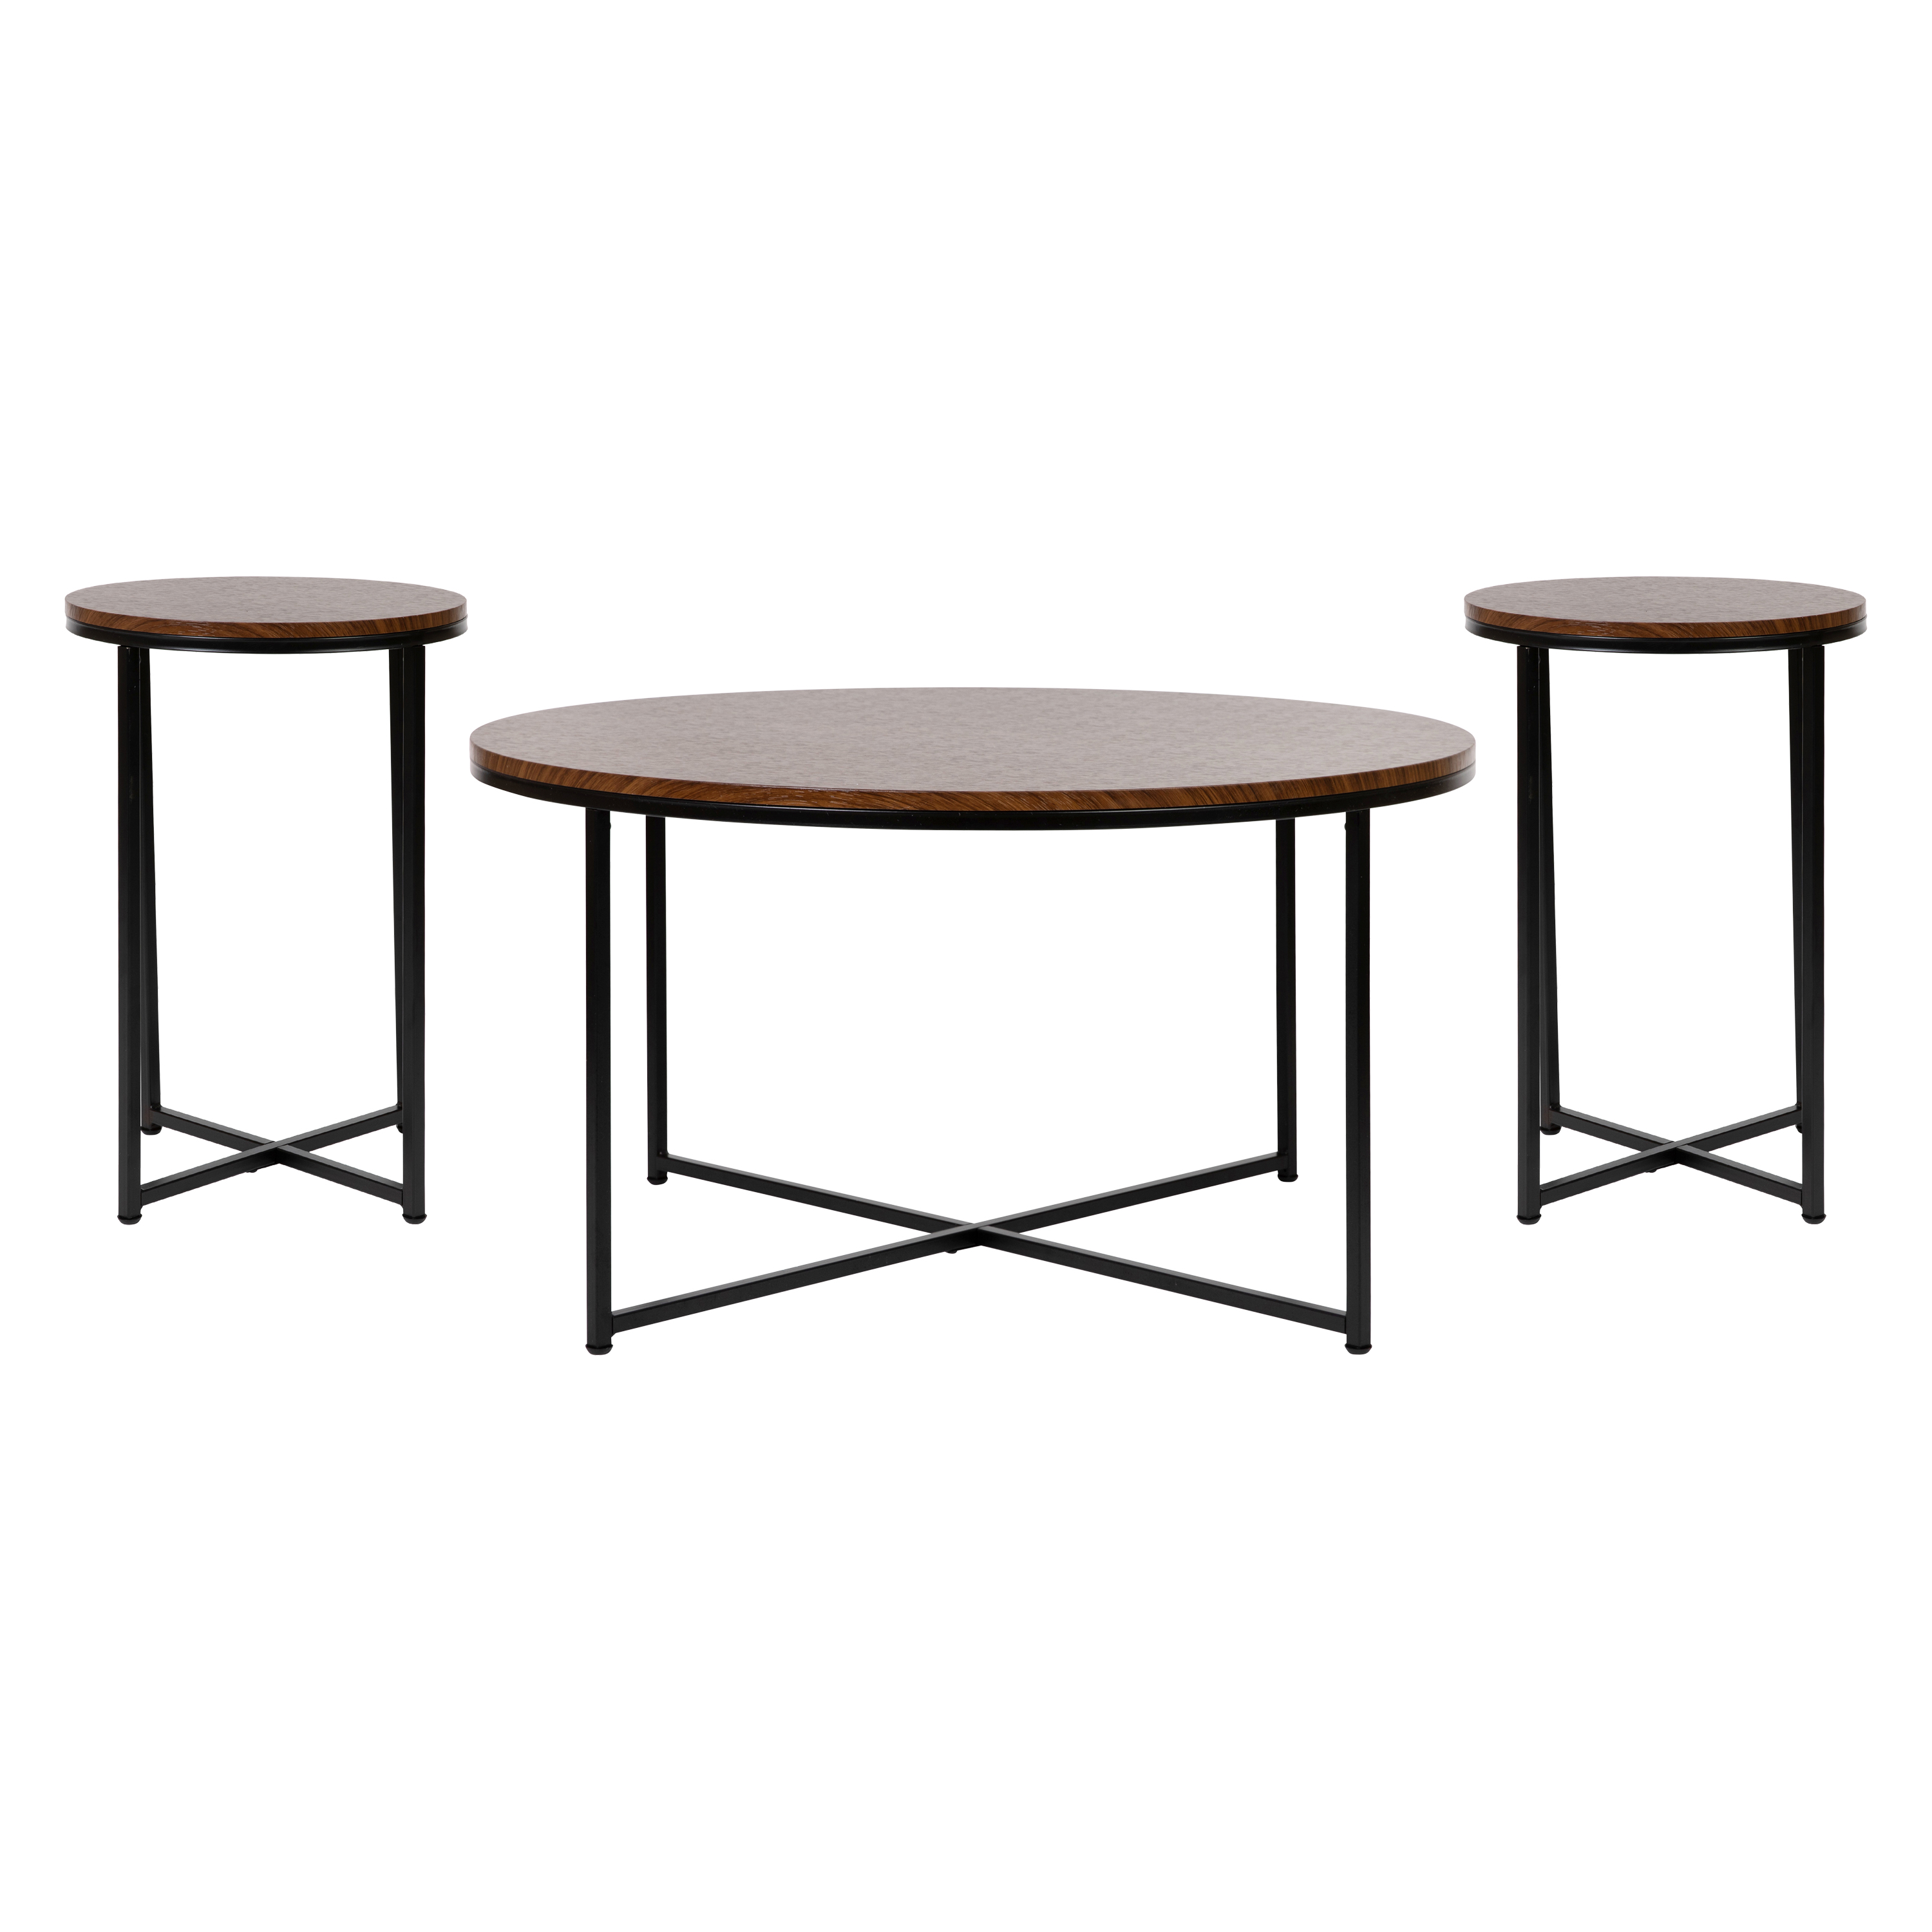 Flash Furniture NAN-CEK-1787-WAL-BK-GG 3 Piece Occasional Walnut Laminate Coffee and End Table Set with Matte Black Crisscross Frame